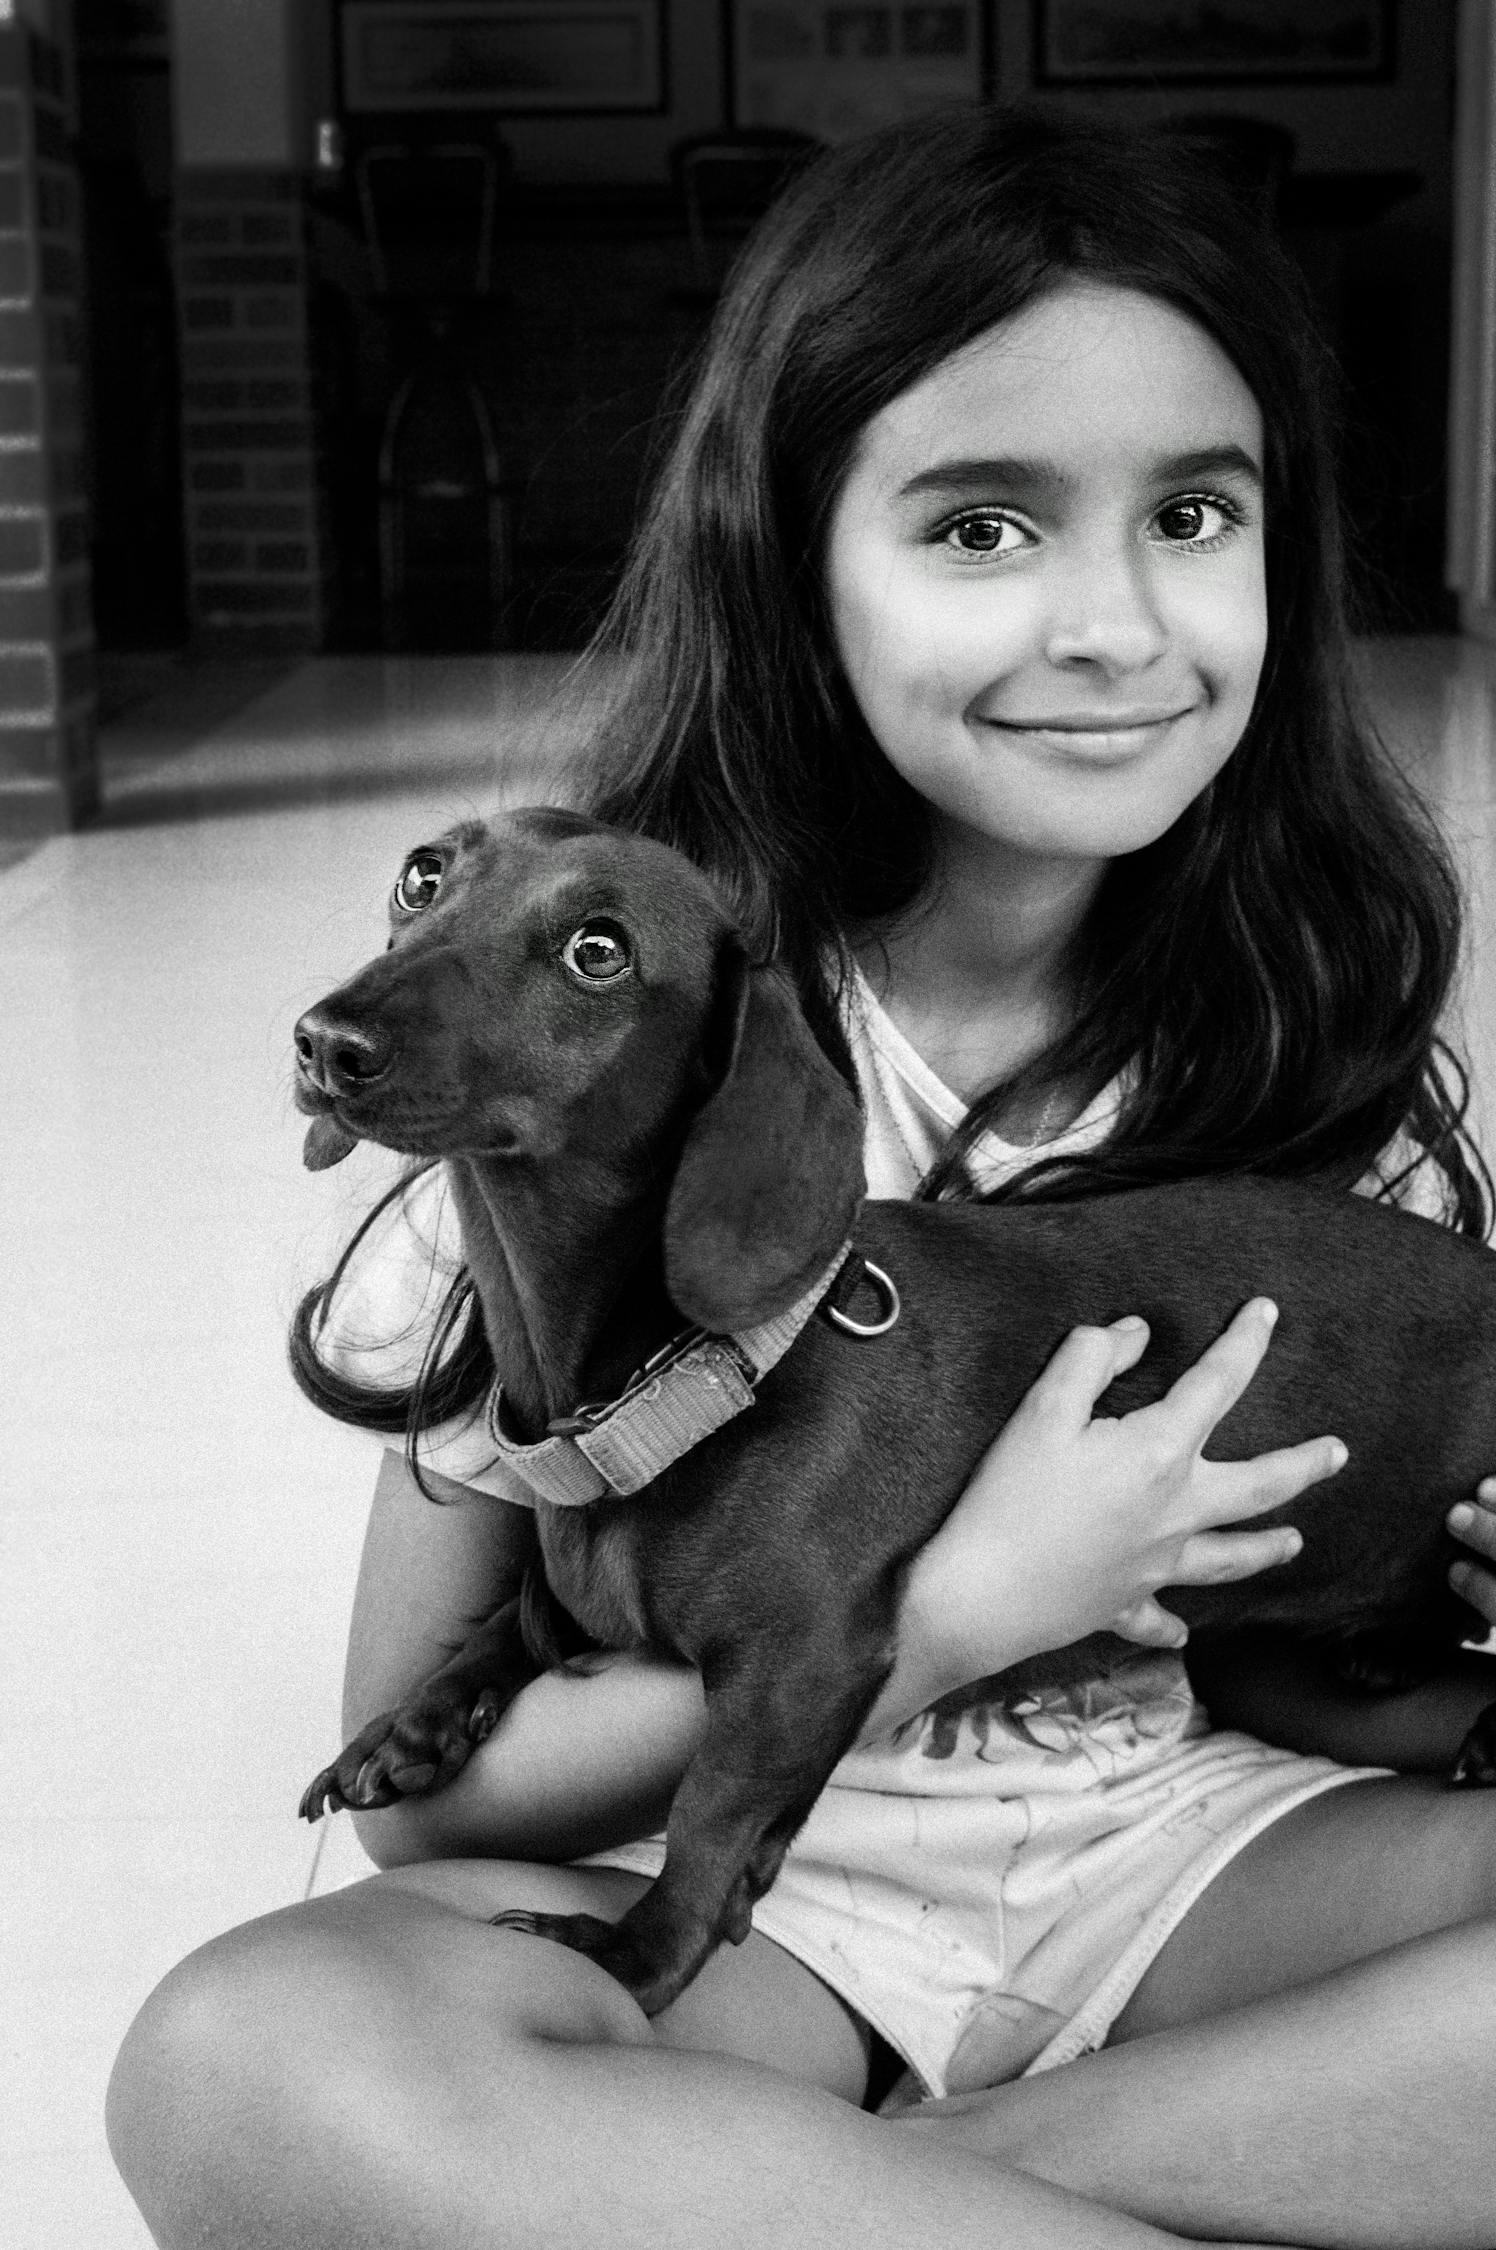 Grayscale Photography Of Smiling Girl Carrying A Dog